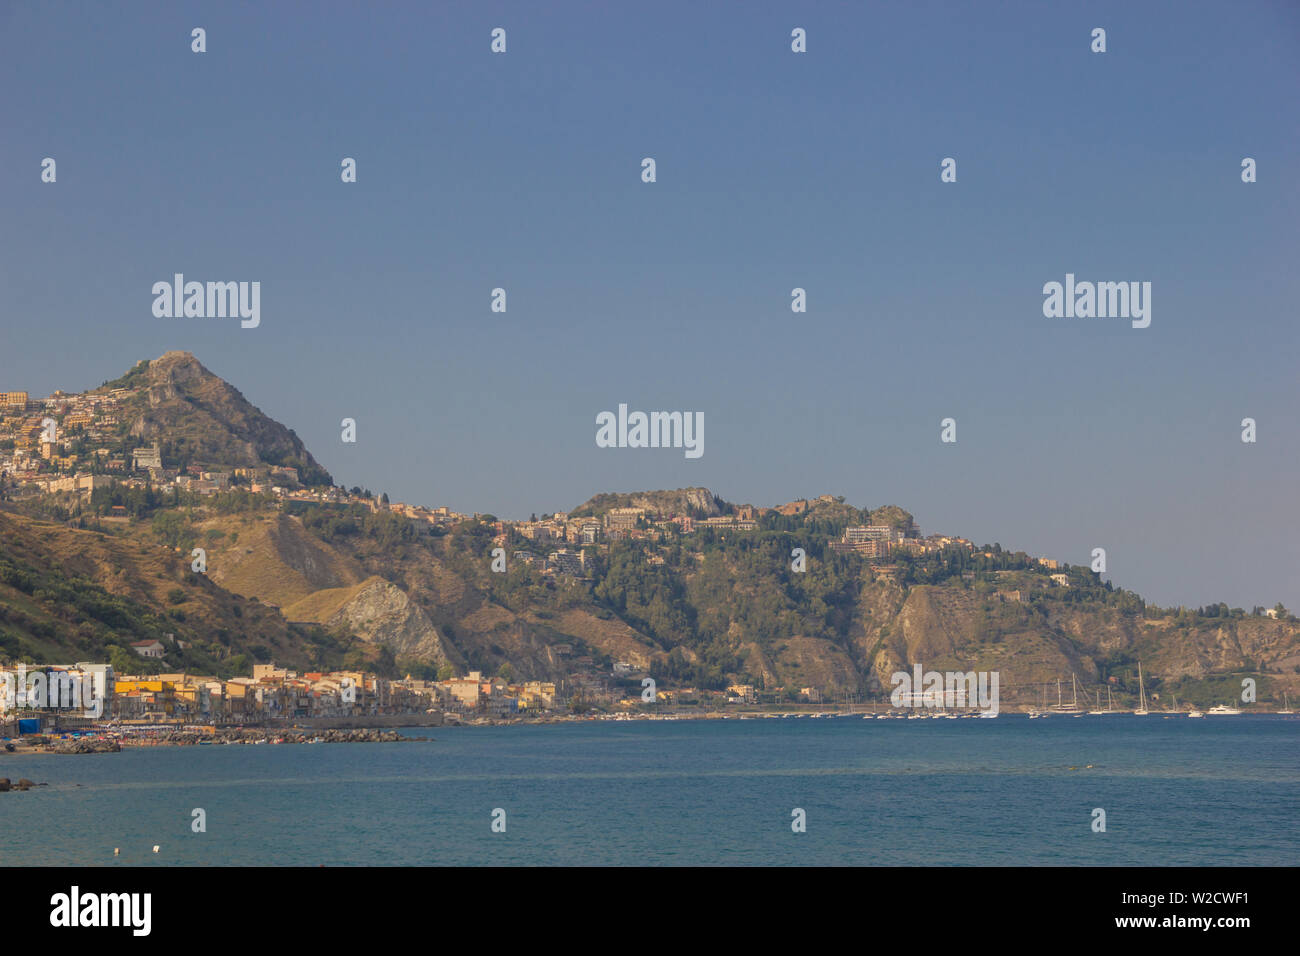 Giardini Naxos Sicily Italy 2019 close up view of the mountains and of famous Taormina on a beautiful blue sea Stock Photo